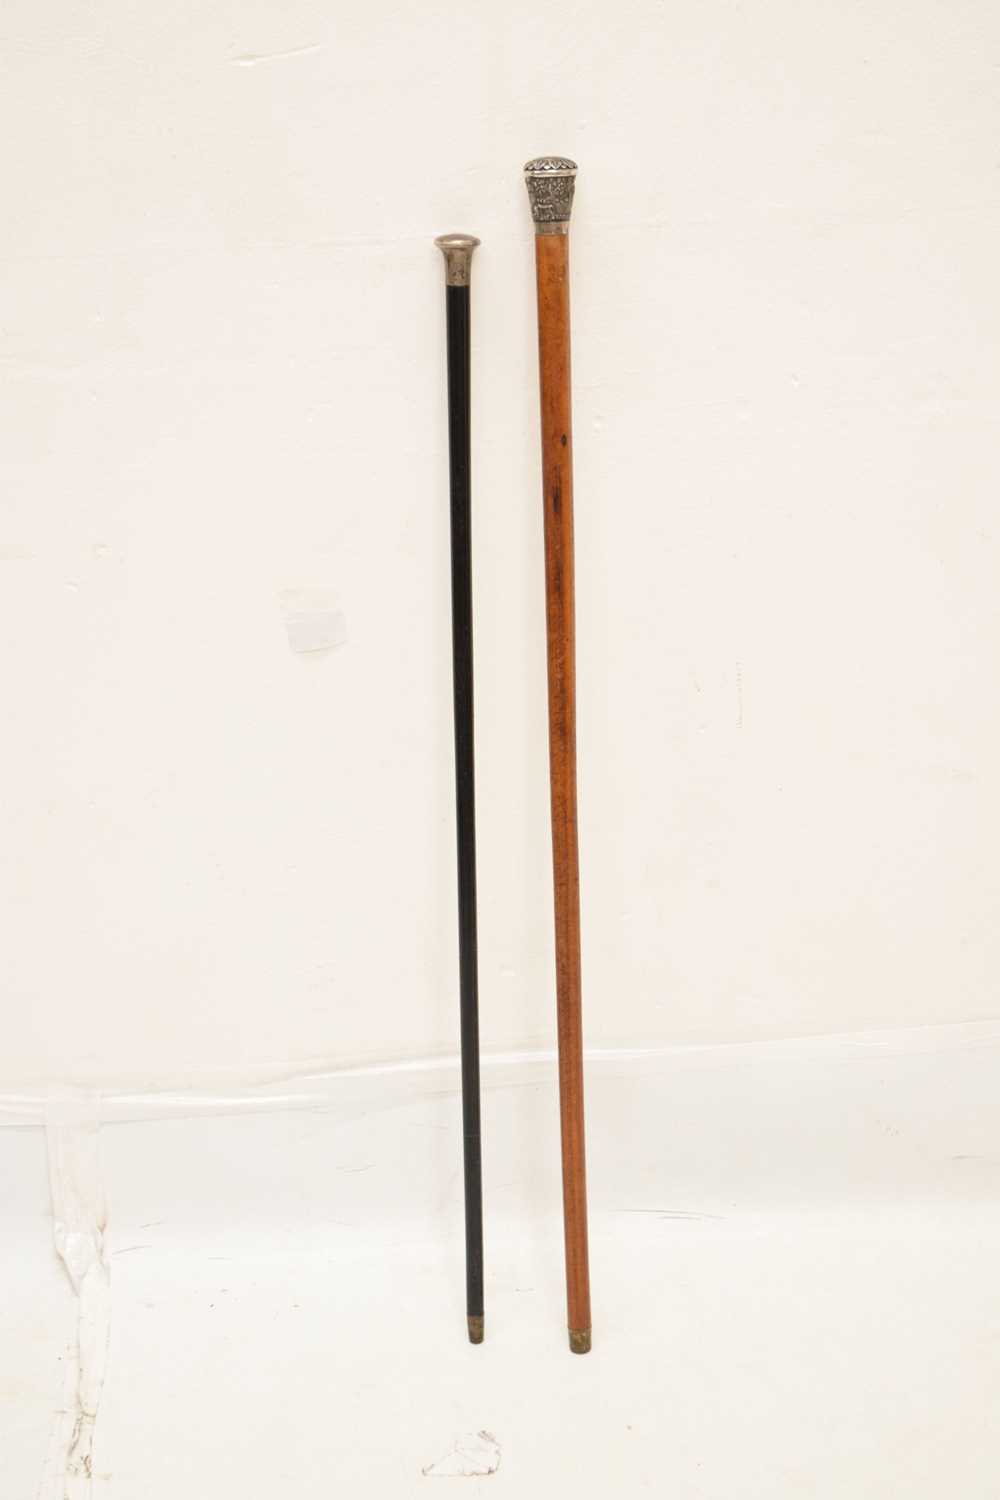 Early 20th century silver topped swagger stick - Image 2 of 9